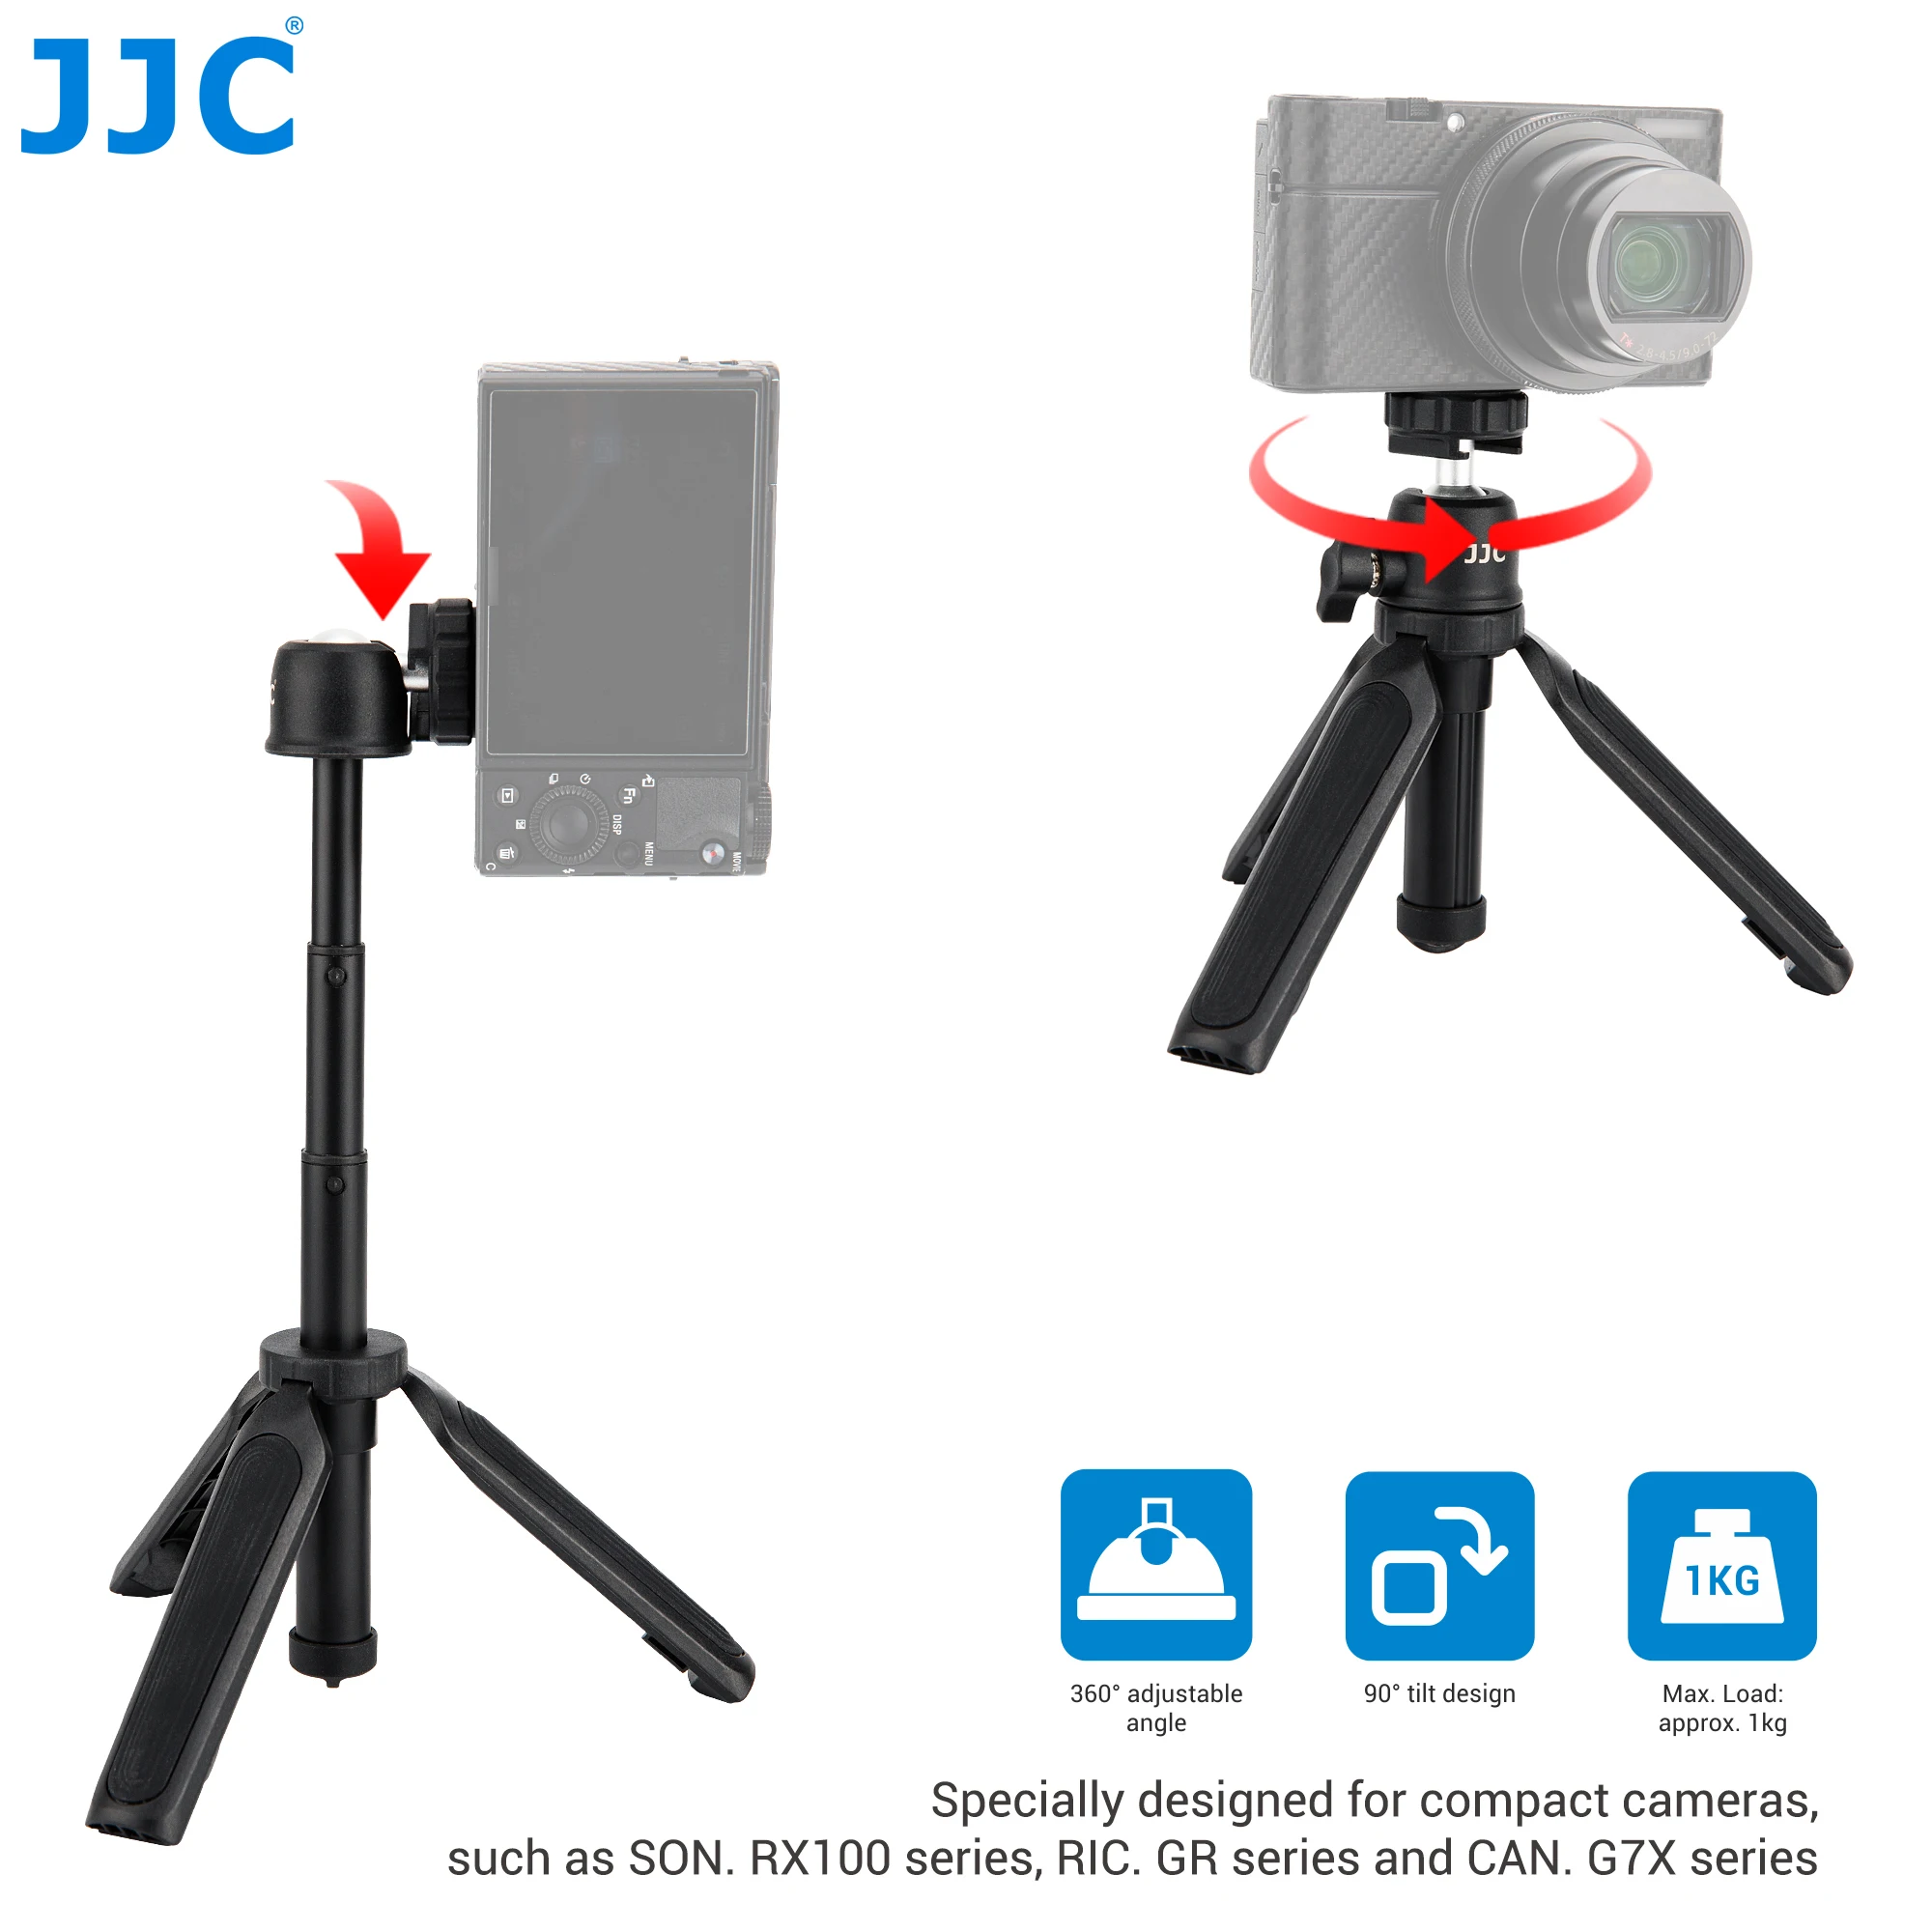 

JJC 3 In 1 Mini Tripod Selfie Stick Hand Grip for Sony ZV1 RX100 II III IV V VI VA VII Ricoh GR II III Olympus TG5 TG4 and more